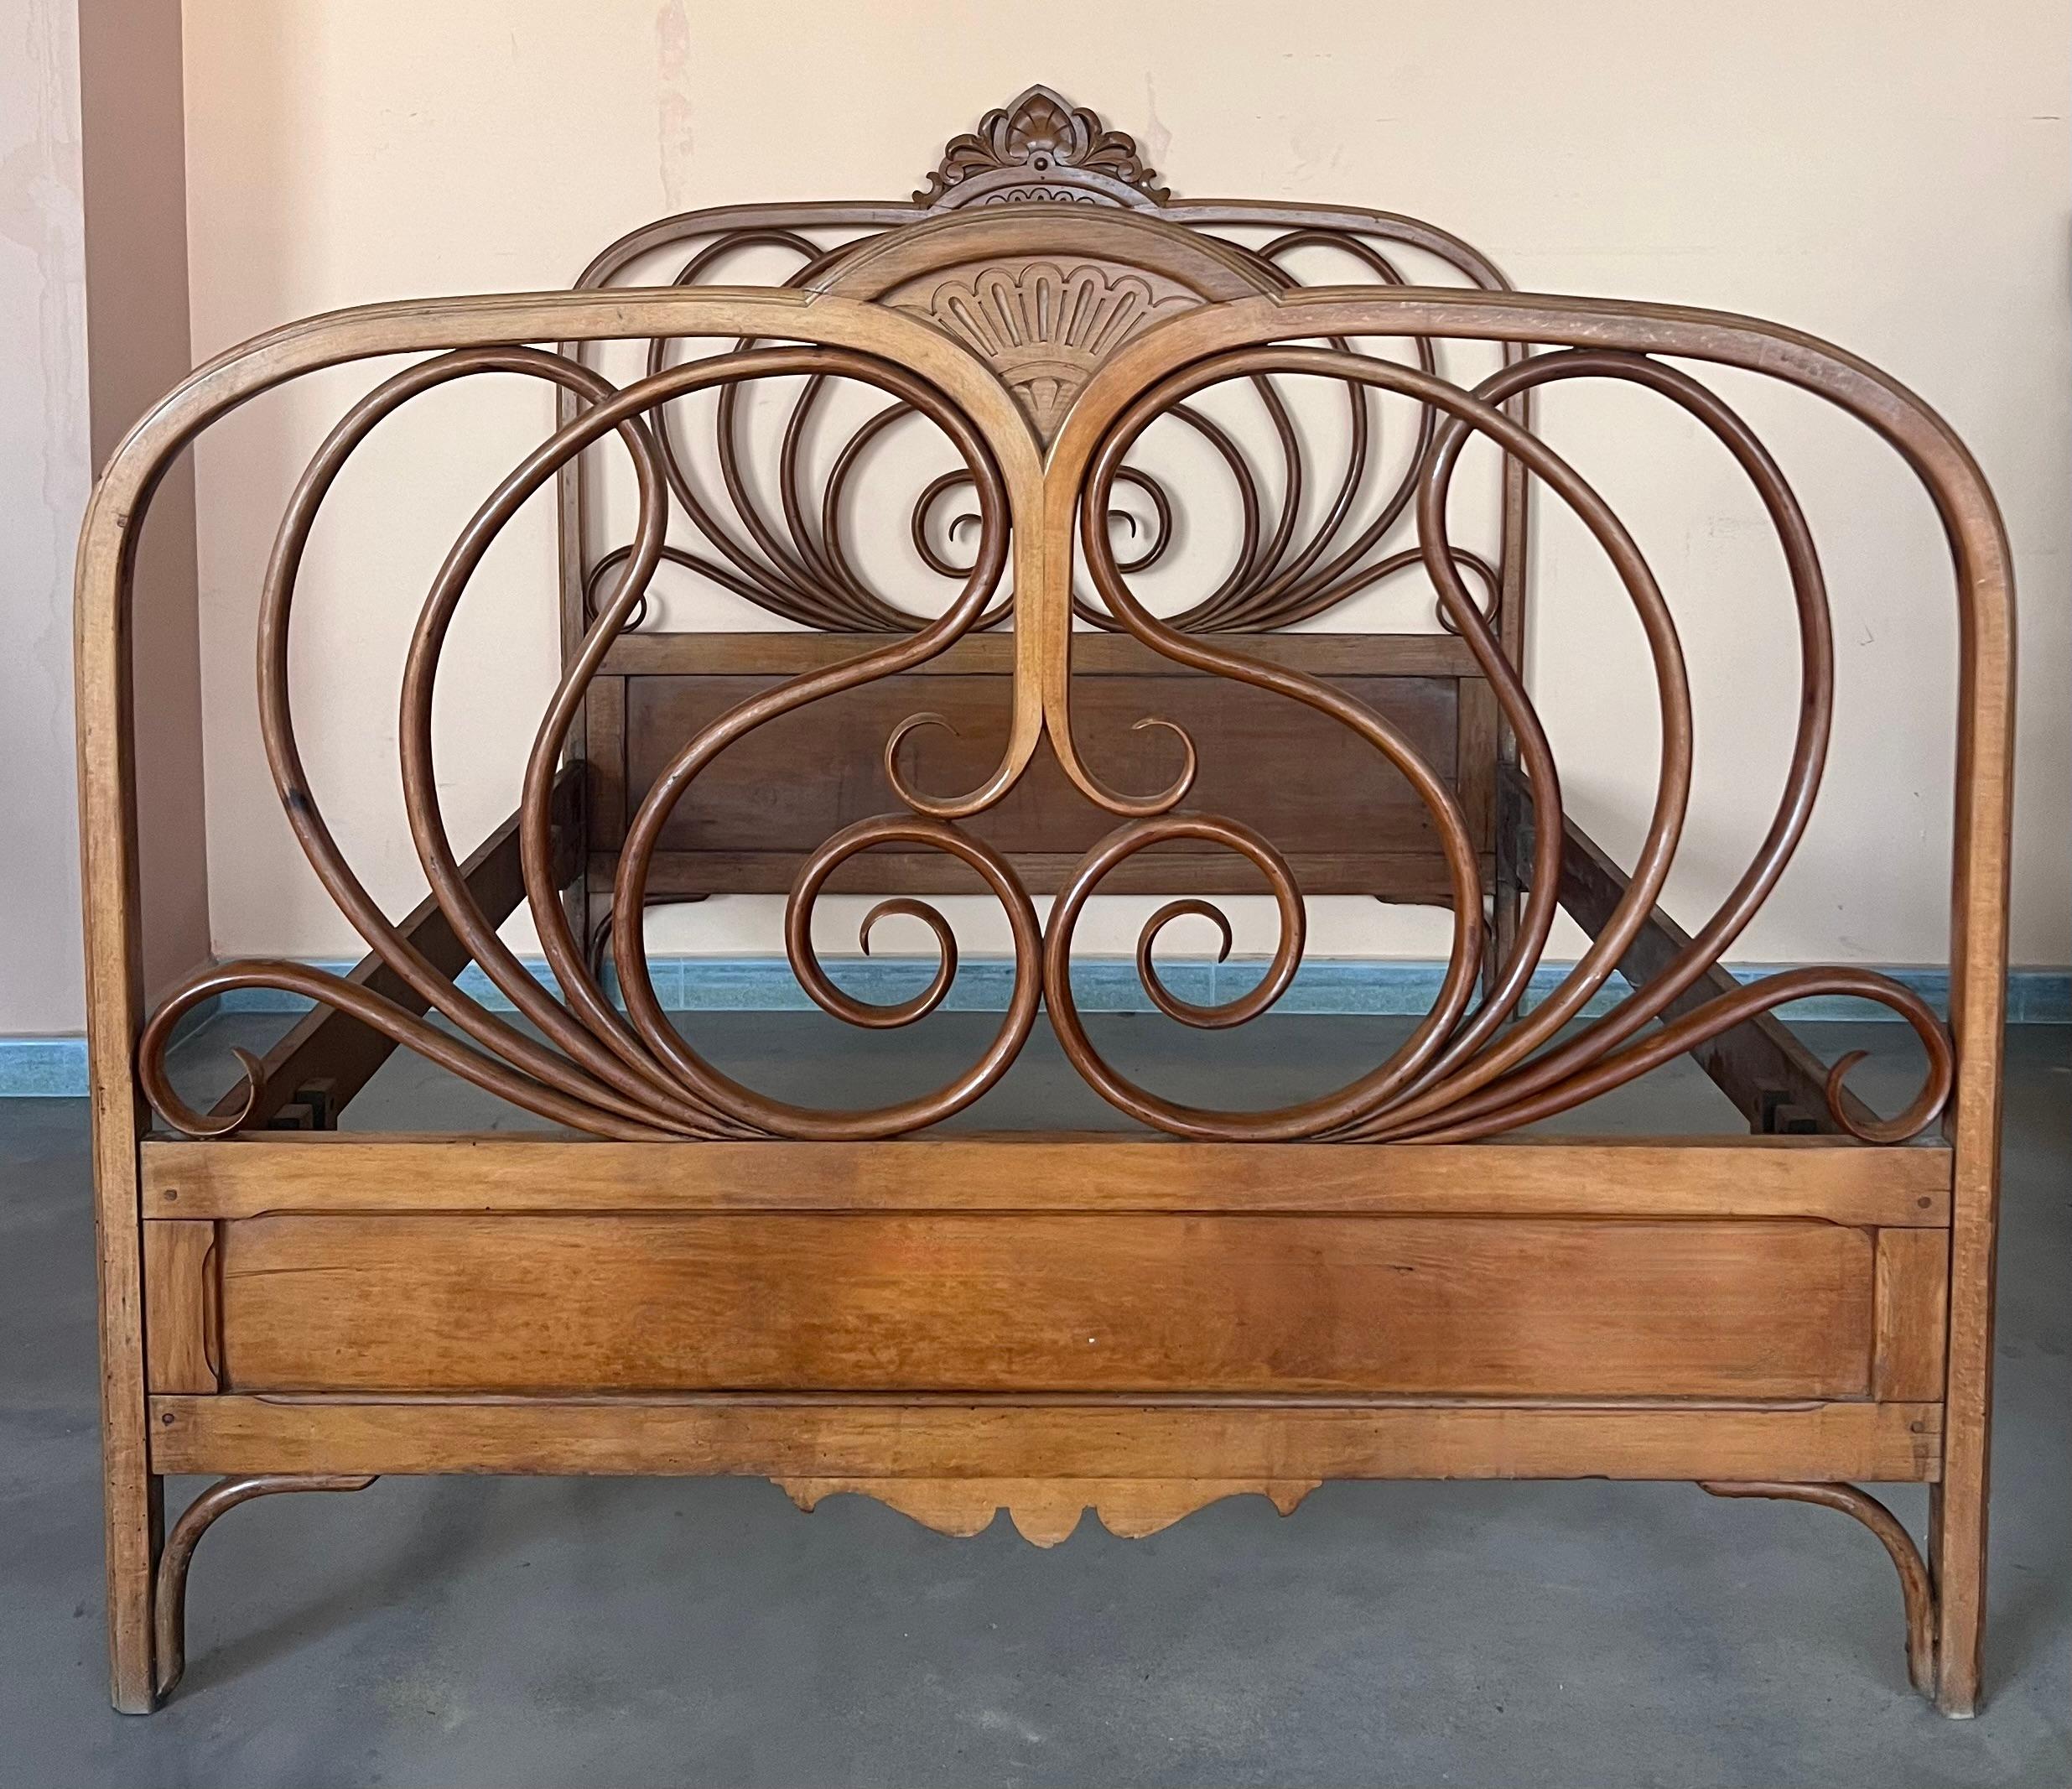 Designed by J & J Kohn, this mahogany stained bentwood bed features curved head and footboards swelling with decorative scroll form tendrils.  
J & J Kohn, No. 876, 1900 Catalog.

Height from the floor to the rails: 15.75in
Headboard Height: 48.45in
